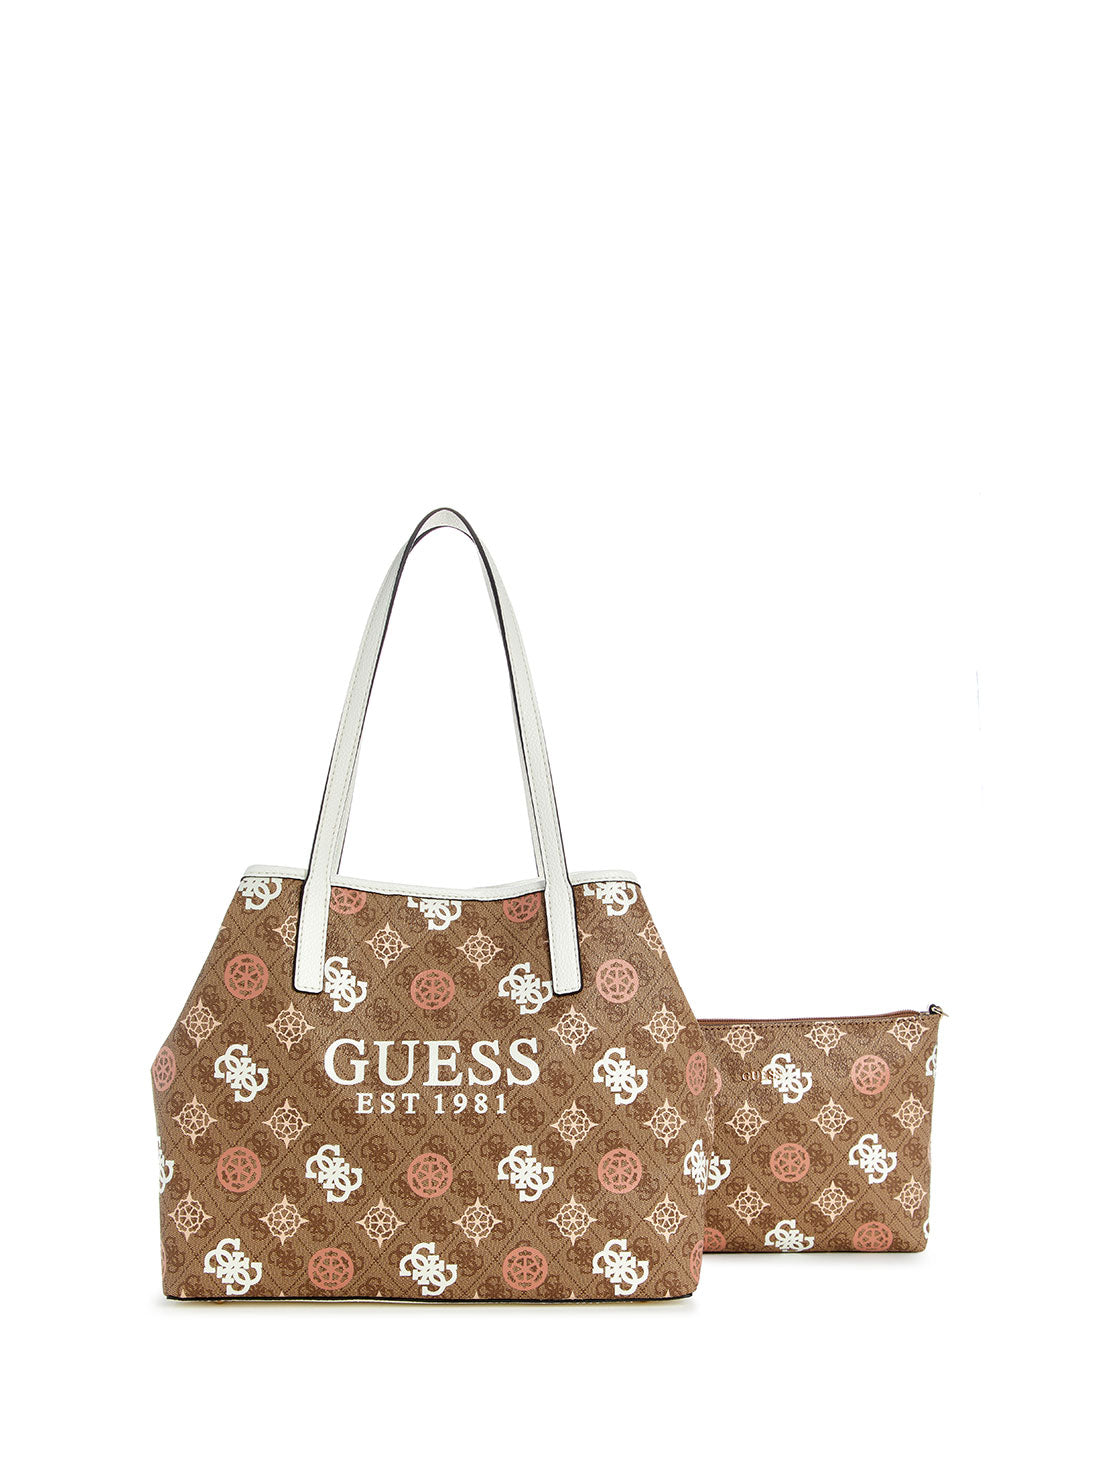 GUESS Beige Tan Logo Vikky 2 in 1 Tote Bag pouch view